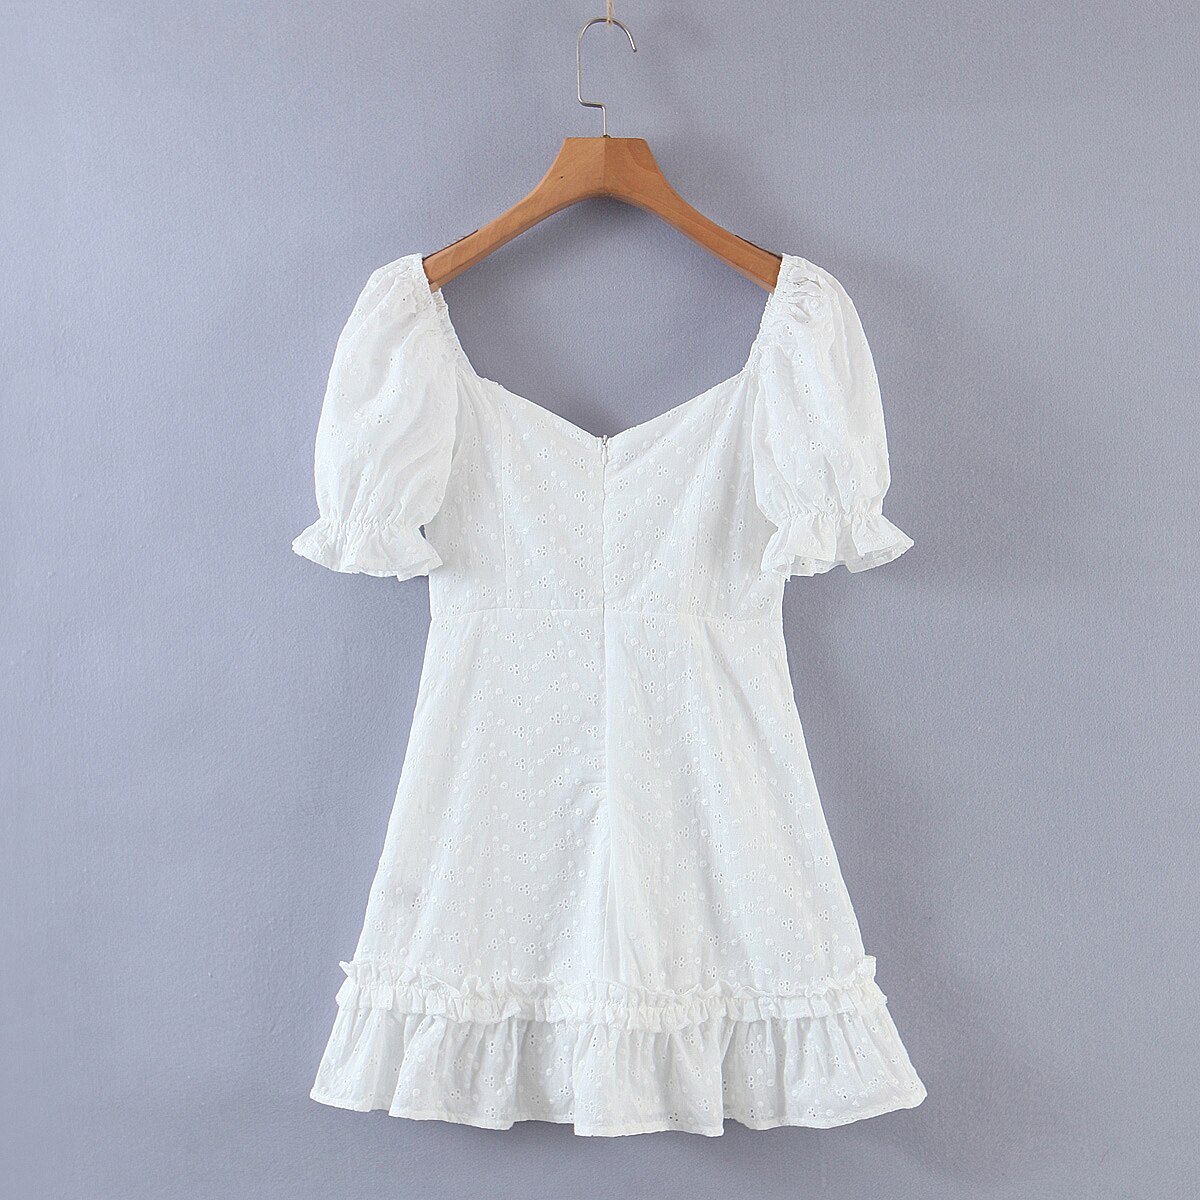 Short-sleeve-dress-women-vintage-embroidered-dresses-summer-ruffle-dress-slim-mini-dress-hollow-out-lace-5